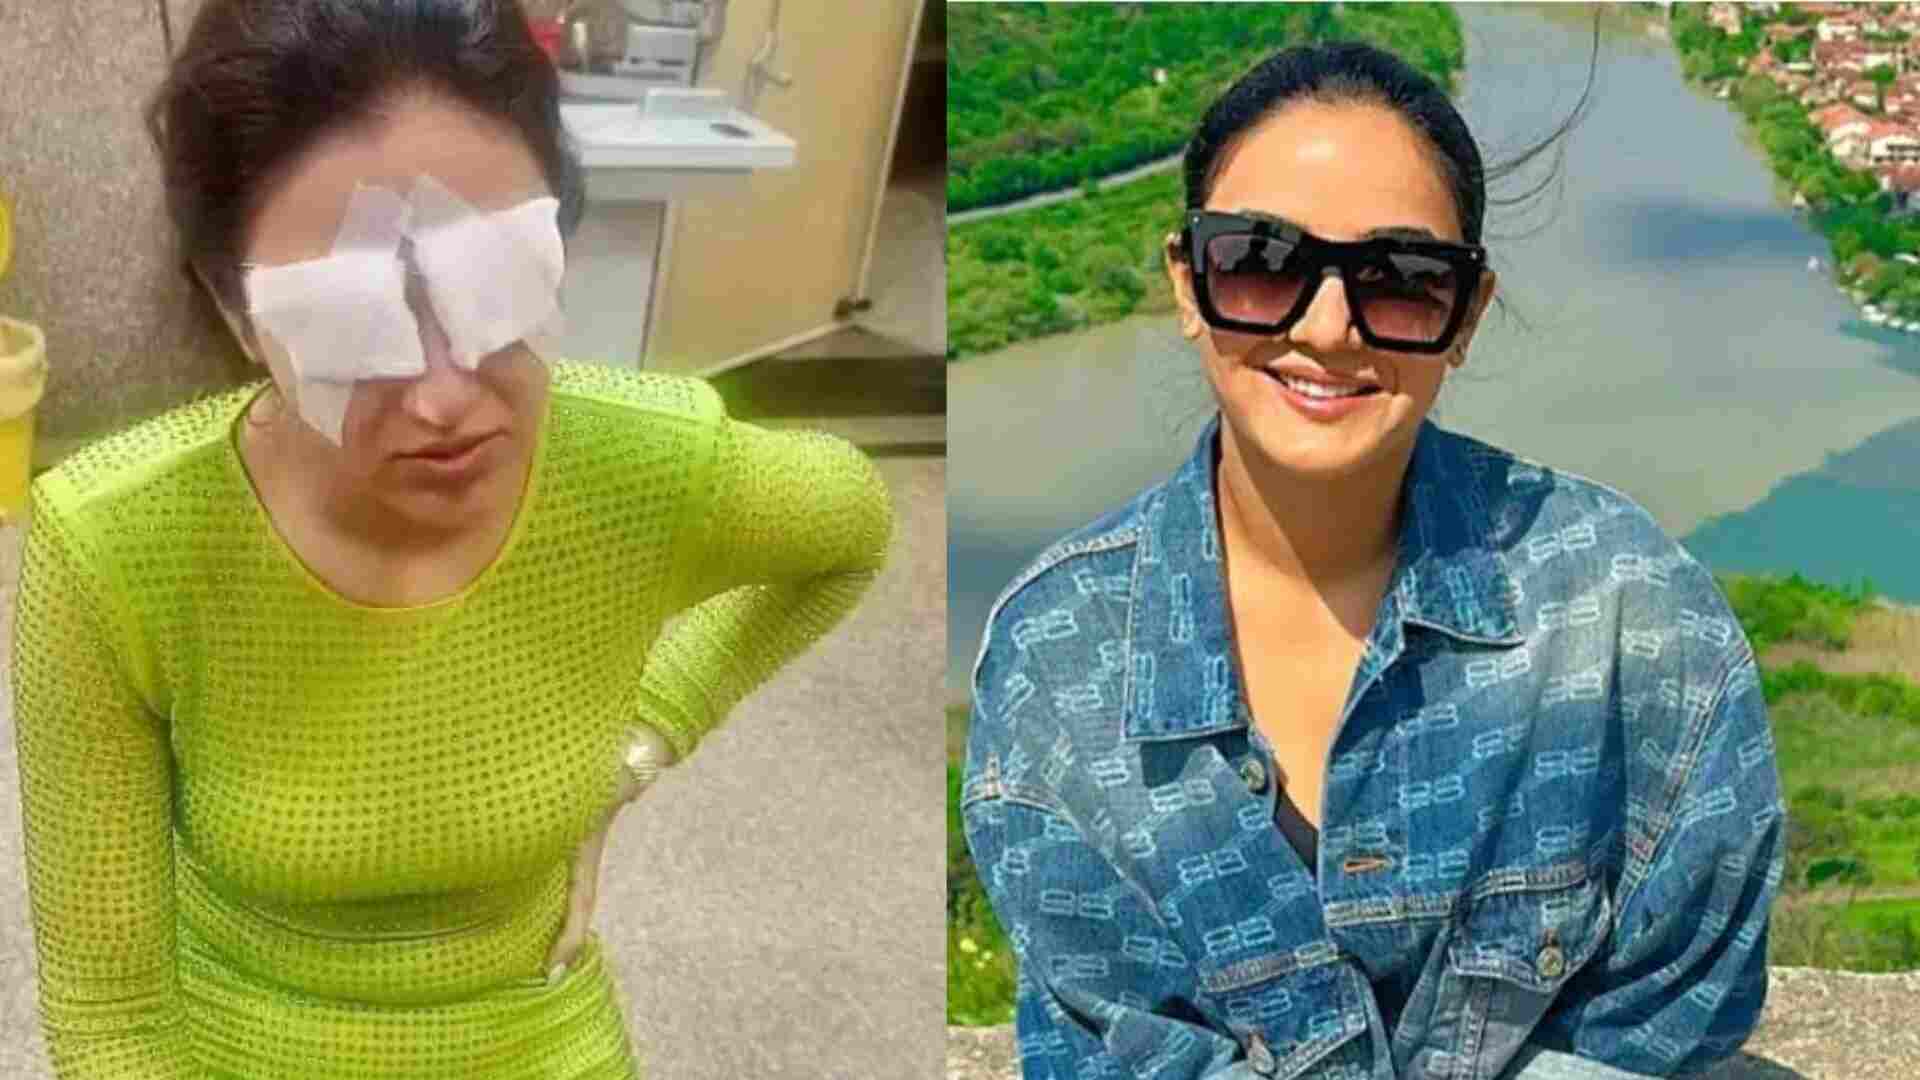 Jasmin Bhasin’s Corneal Damage: A Cautionary Tale For Contact Lens Wearers